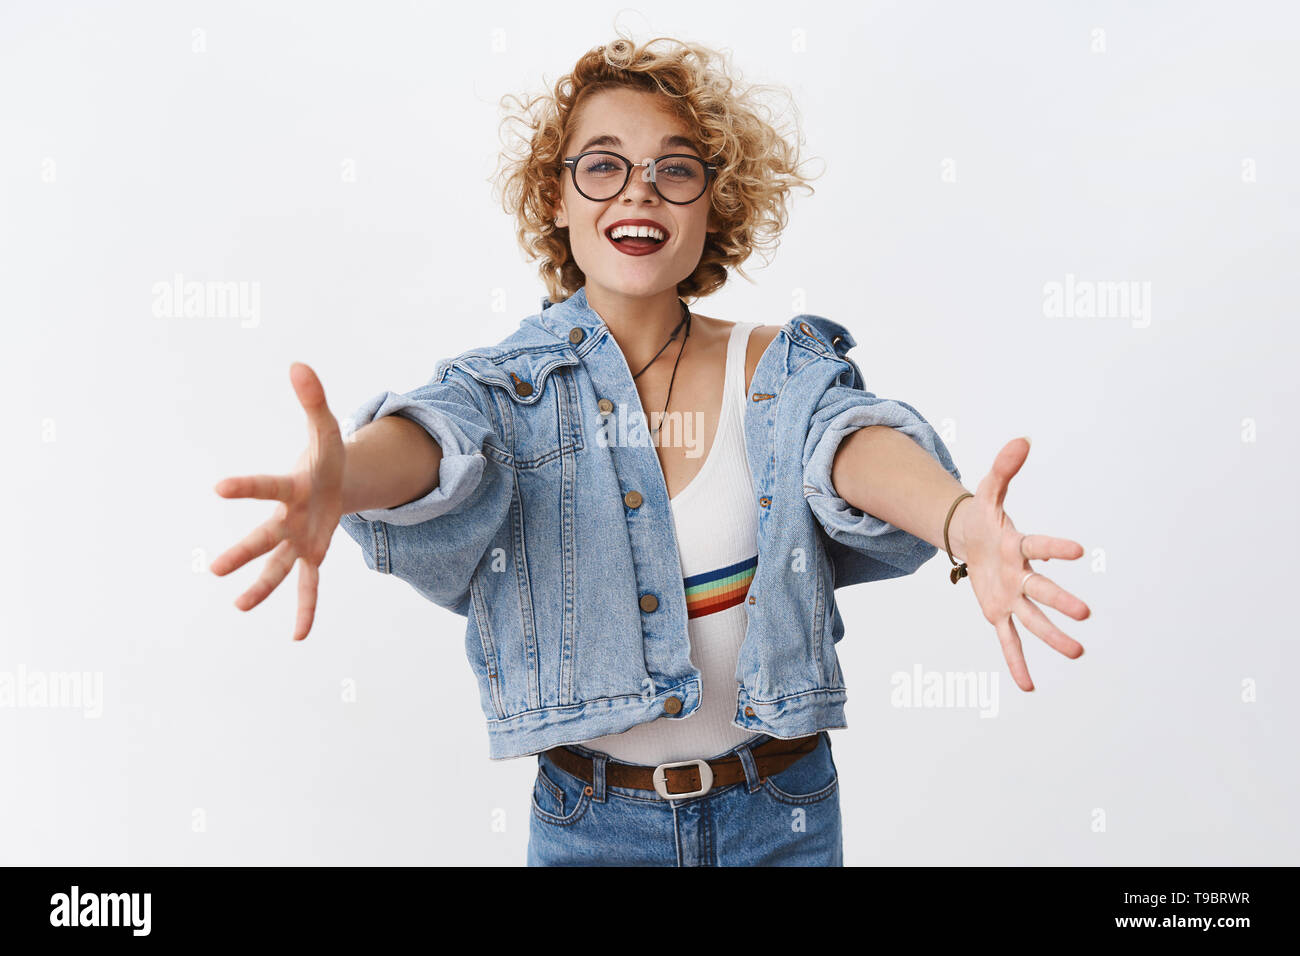 Outdoor fashion portrait of stylish young woman having fun, emotional face  , laughing, looking at camera. Urban city street style. Long jeans coat and  orange hoodie. Spring or fall outfit. Stock Photo